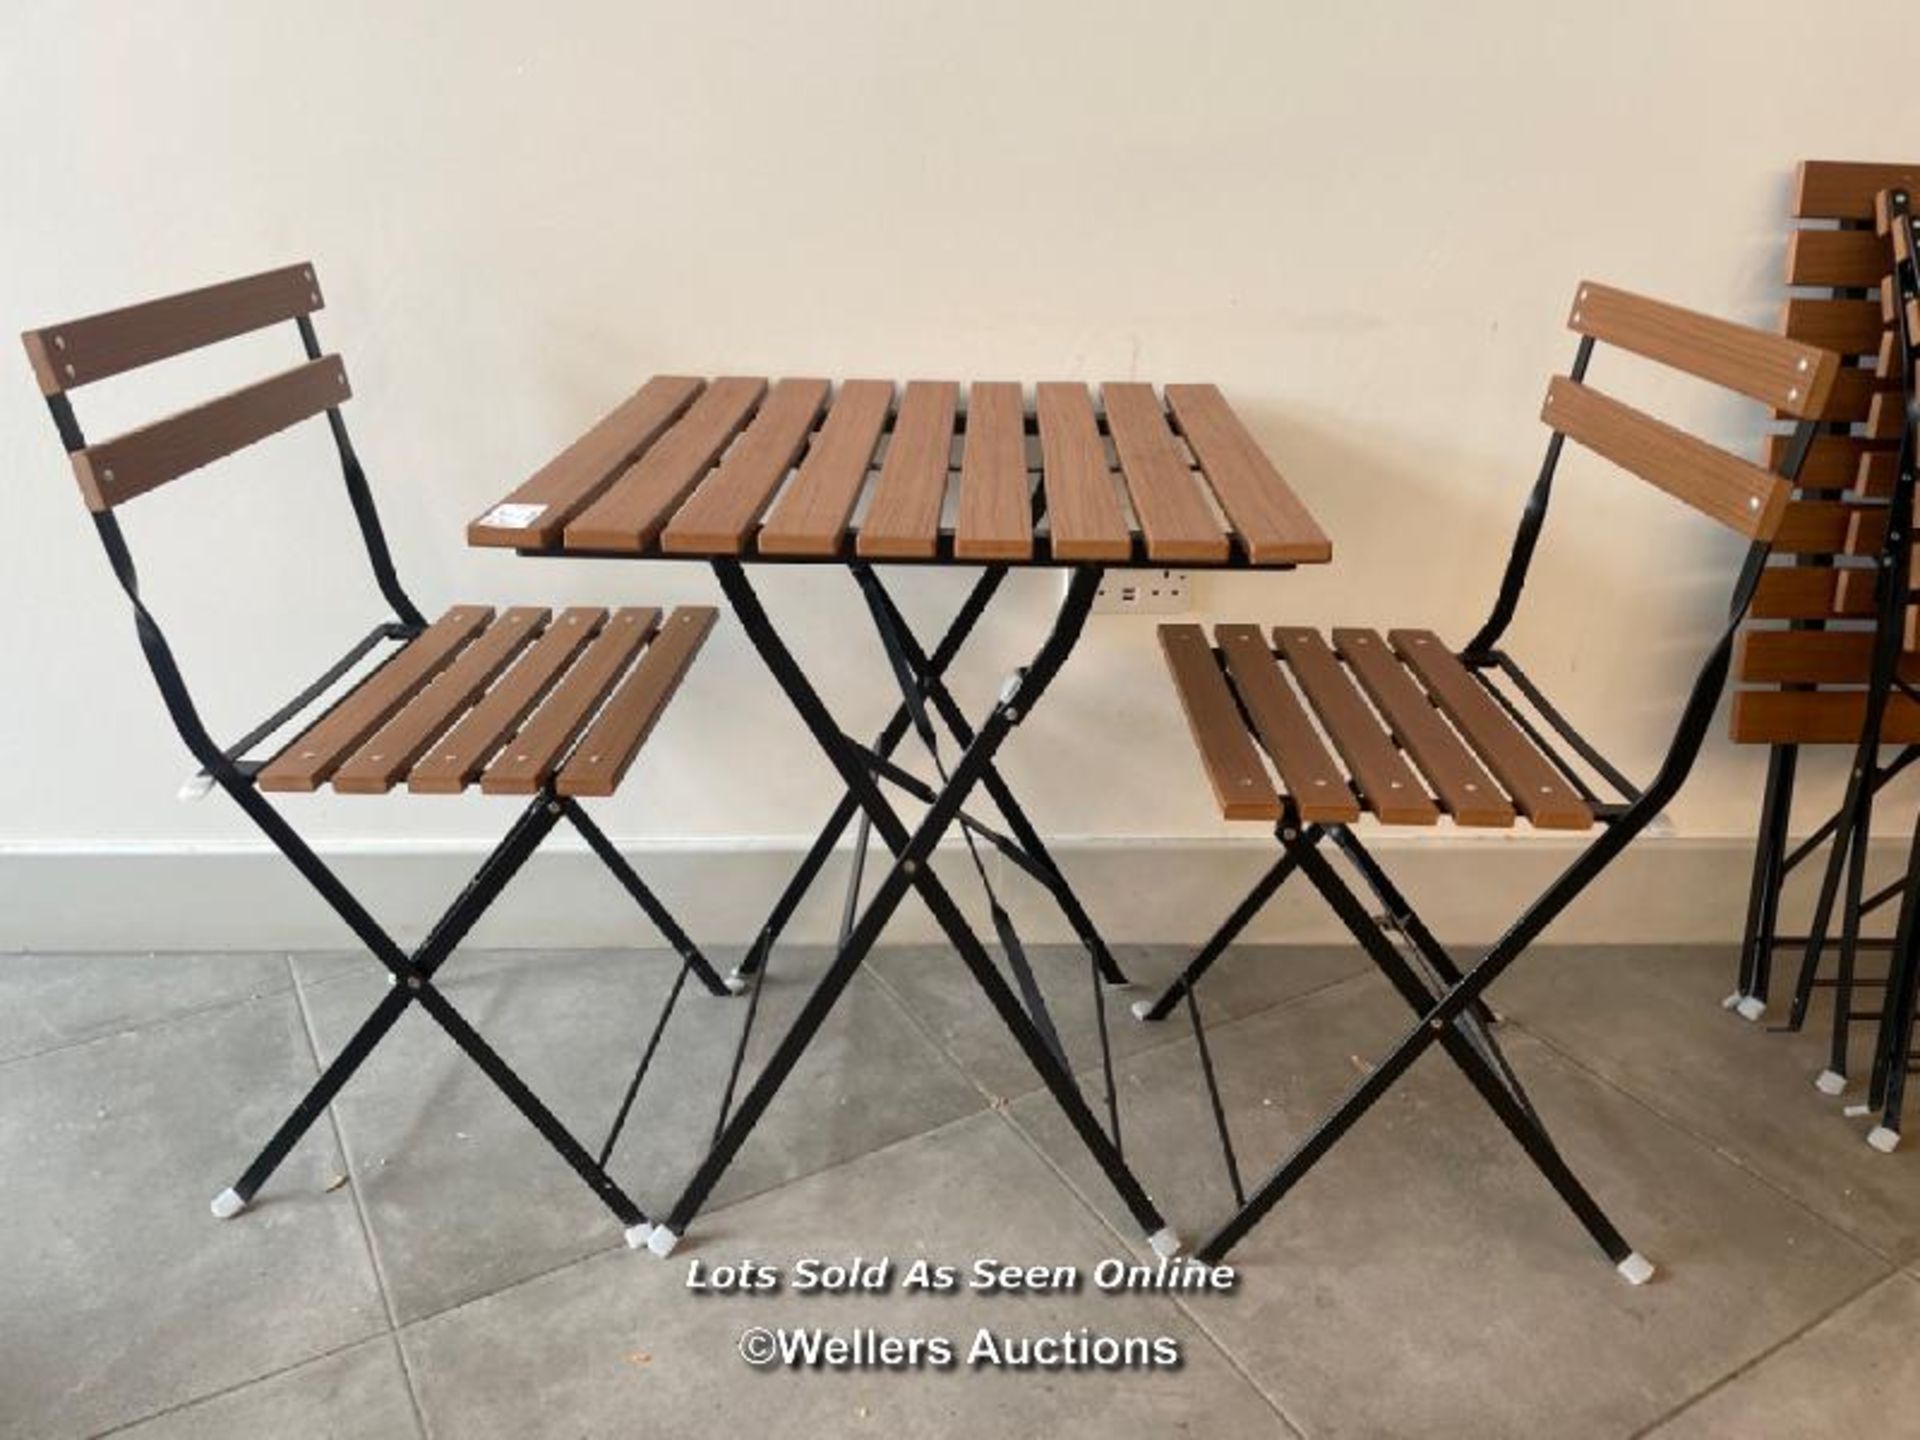 FOLDING TABLE AND CHAIRS SET (ONE TABLE AND TWO CHAIRS) - TABLE 71CM H X 60CM W X 60CM D / THE